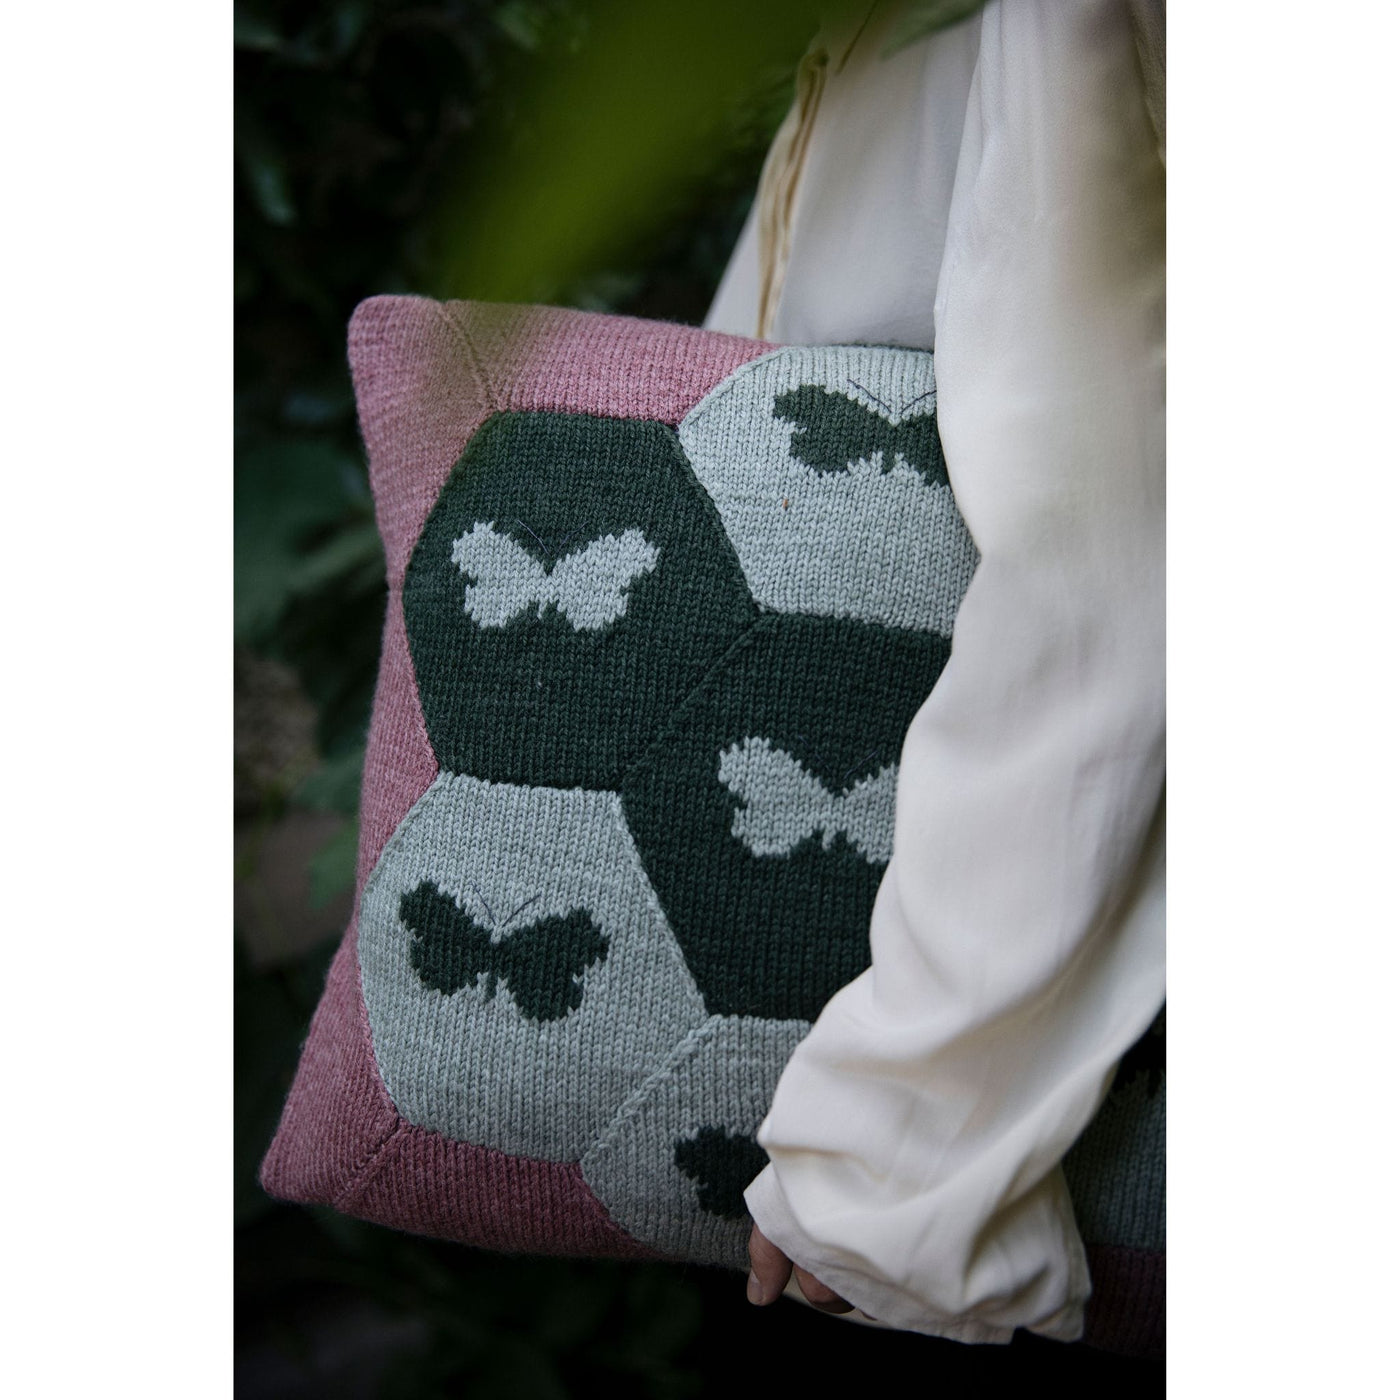 Page from The Knitted Fabric by Dee Hardwicke showing a pillow with hexagons and butterflies